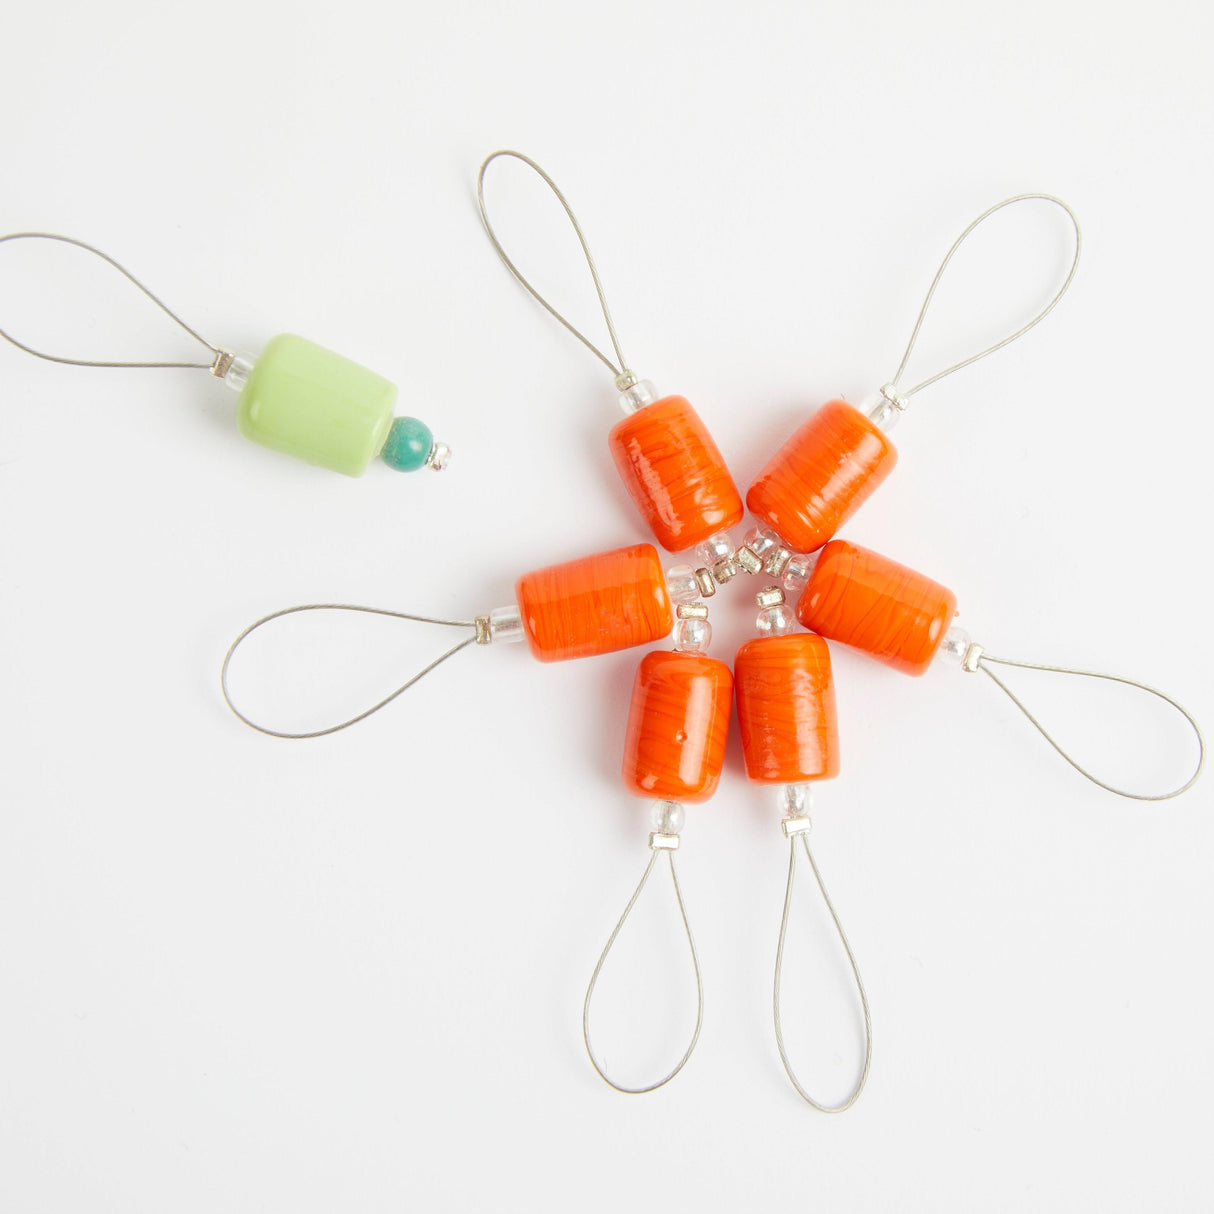 KnitPro NEW ZOONI Stitch Markers in Coloured Beads "Orange Lily" (10931) - Leo Hobby